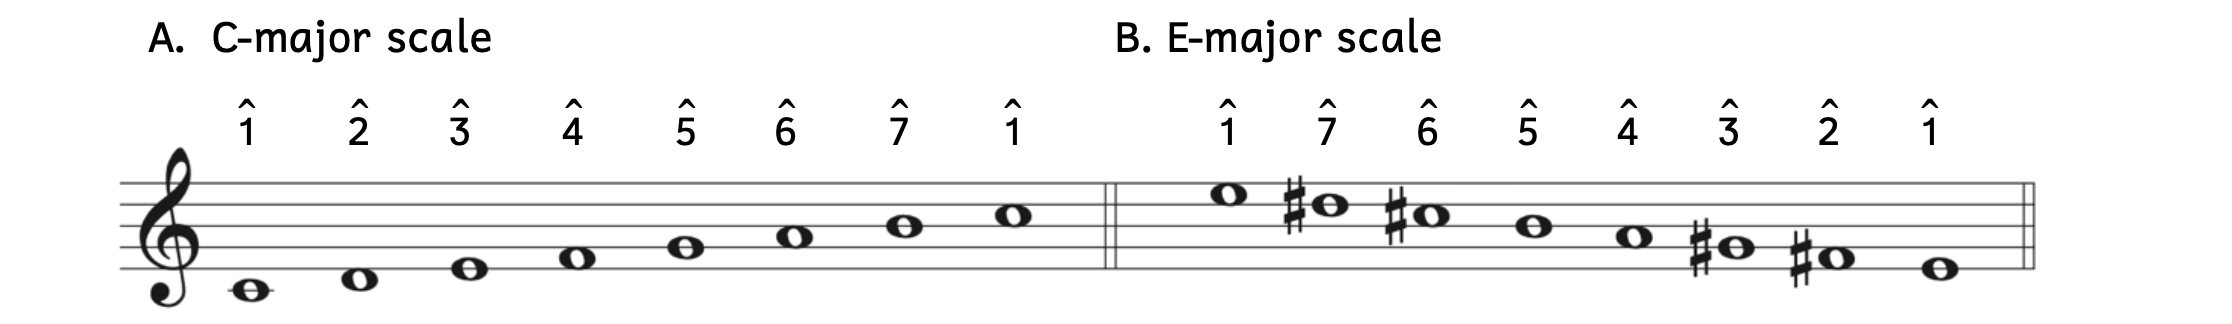 Comparing scale degrees in two different major scales. Example A shows a C major scale, where scale degree 1 is C, scale degree 2 is D, scale degree 3 is E, scale degree 4 is F, scale degree 5 is G, scale degree 6 is A, scale degree 7 is B, and scale degree 1, C, returns. Example B shows a descending E-major scale, where scale degree 1 is E, scale degree 7 is D-sharp, scale degree 6 is C-sharp, scale degree 5 is B, scale degree 4 is A, scale degree 3 is G-sharp, scale degree 2 is F-sharp, and scale degree 1, E, returns at the end.